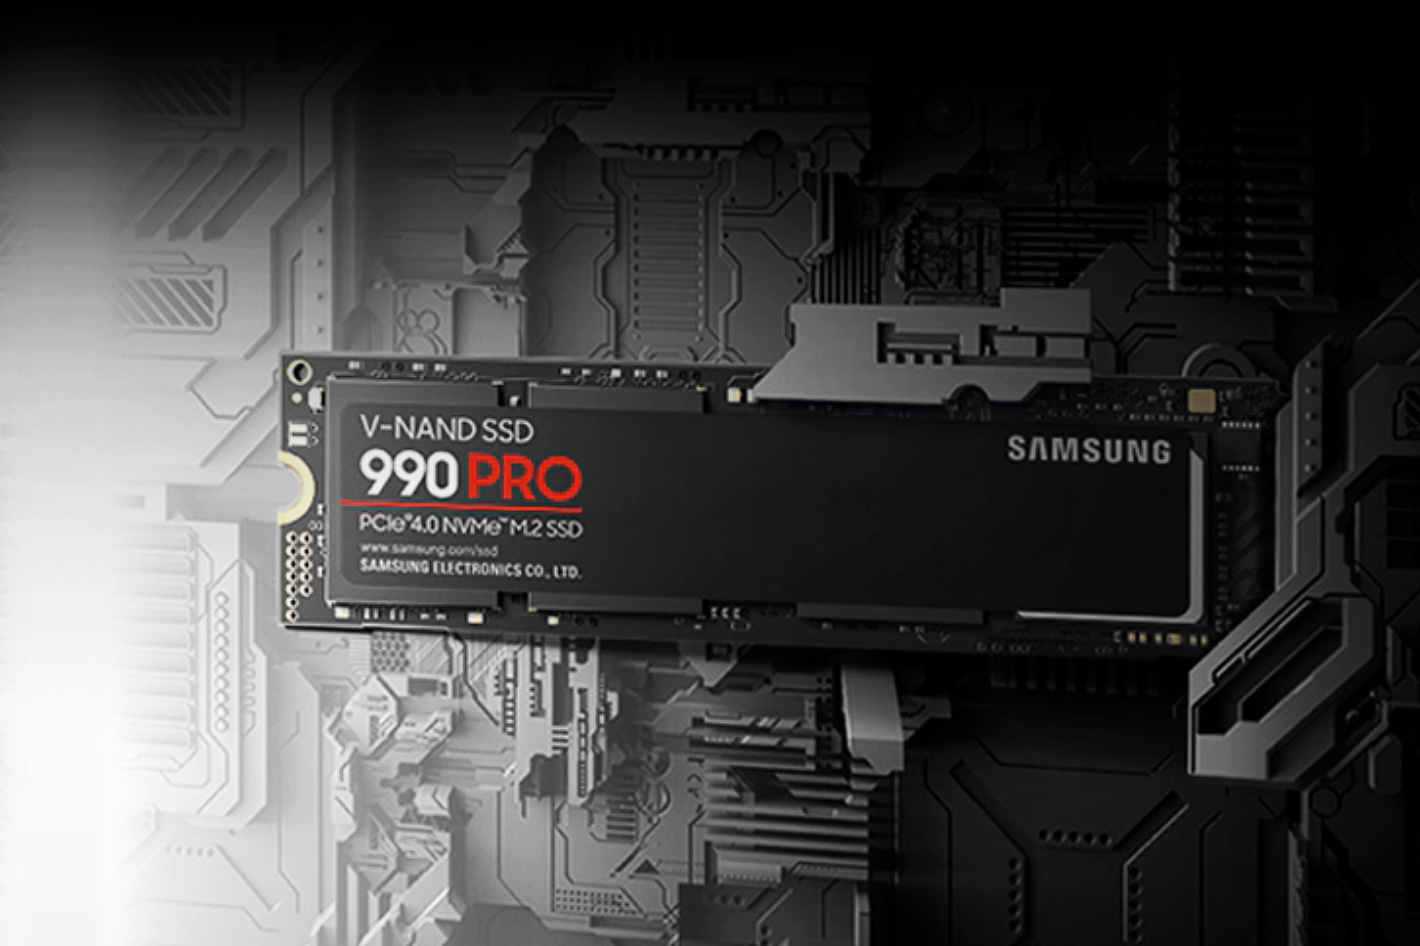 Samsung unveils 990 PRO Series SSDs for creative applications